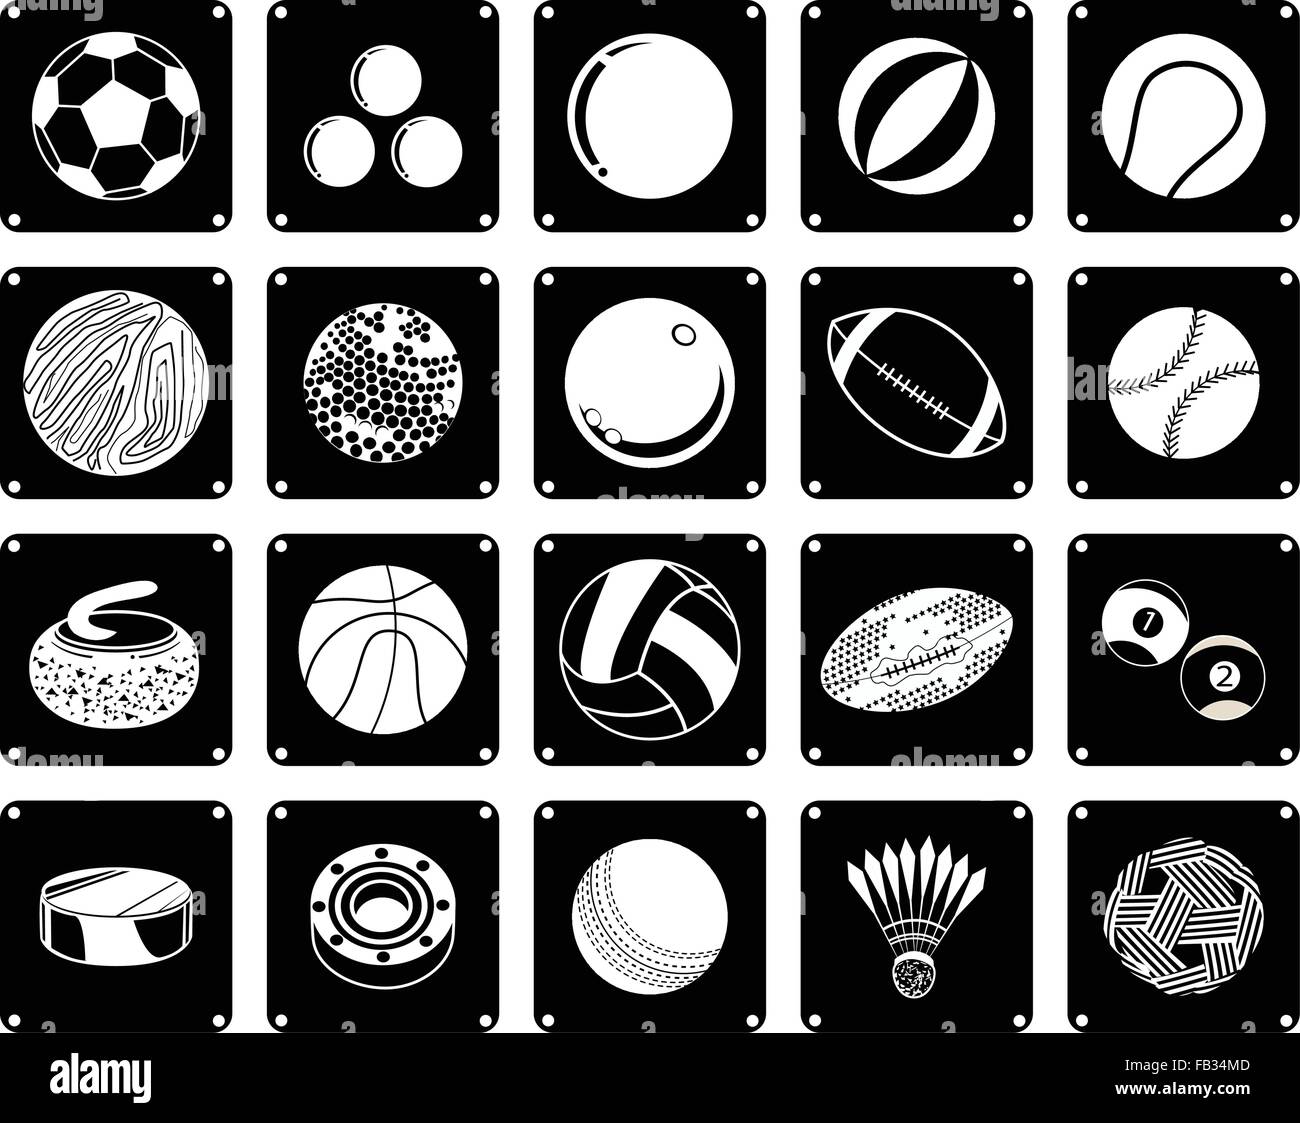 Illustration Set of 20 Assorted Icon of Sport Balls and Sport Items in Black and White Colors. Stock Vector